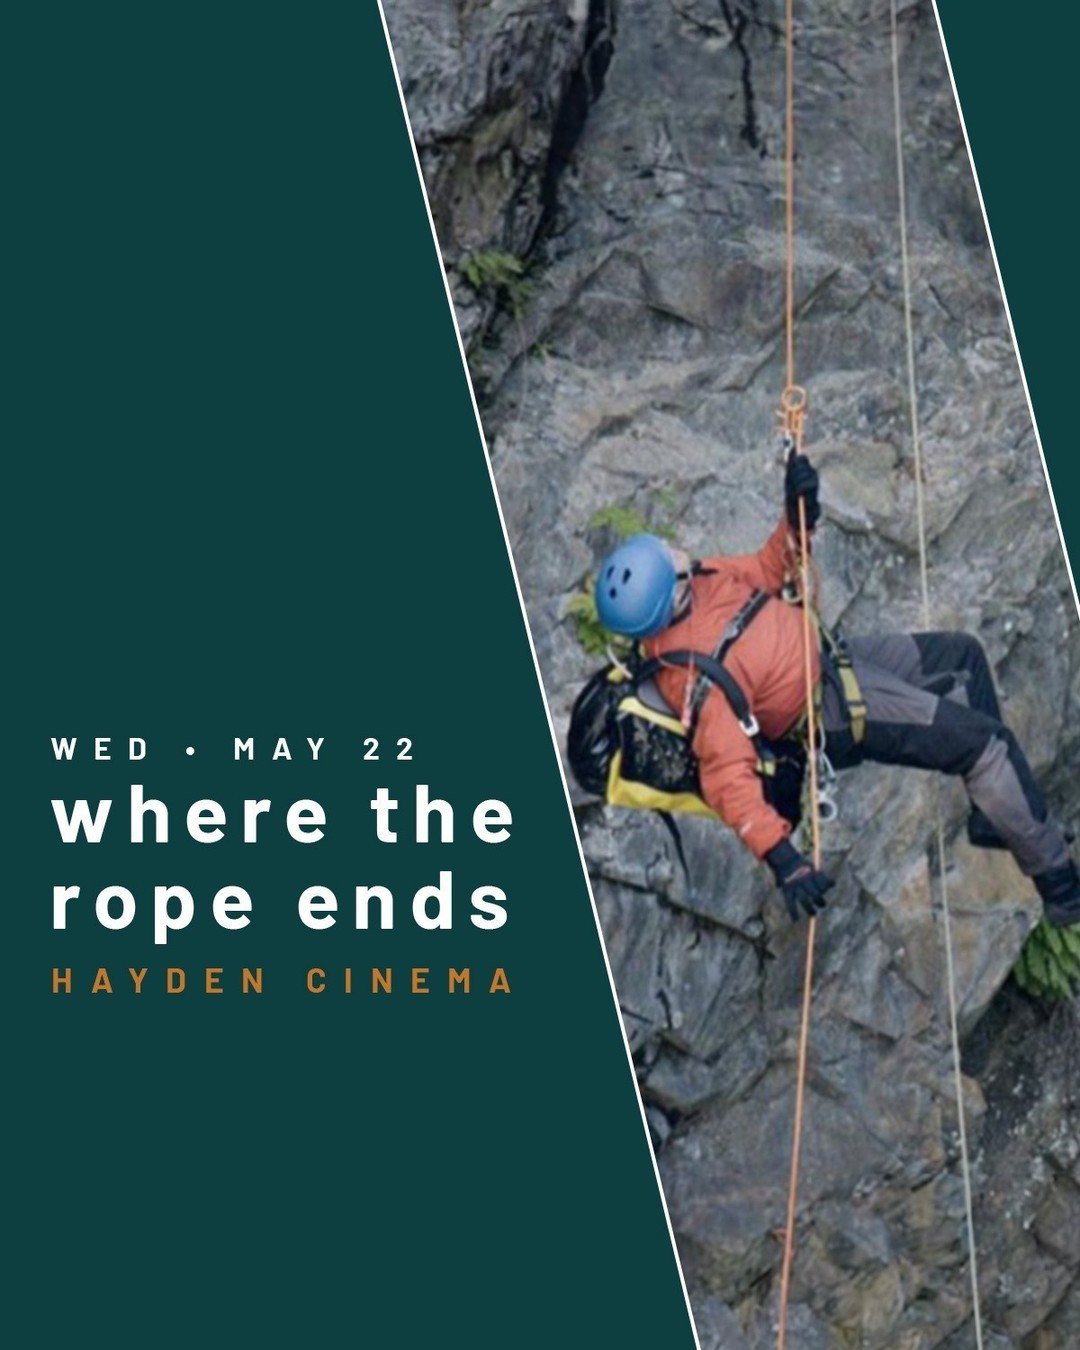 Mark your calendars! Kootenai County Volunteer Search and Rescue is putting on a showing of &ldquo;Where The Rope Ends&rdquo; at the Hayden Cinema May 22! This is going to be a great tailgate party with lots of outdoor businesses, as well as search a